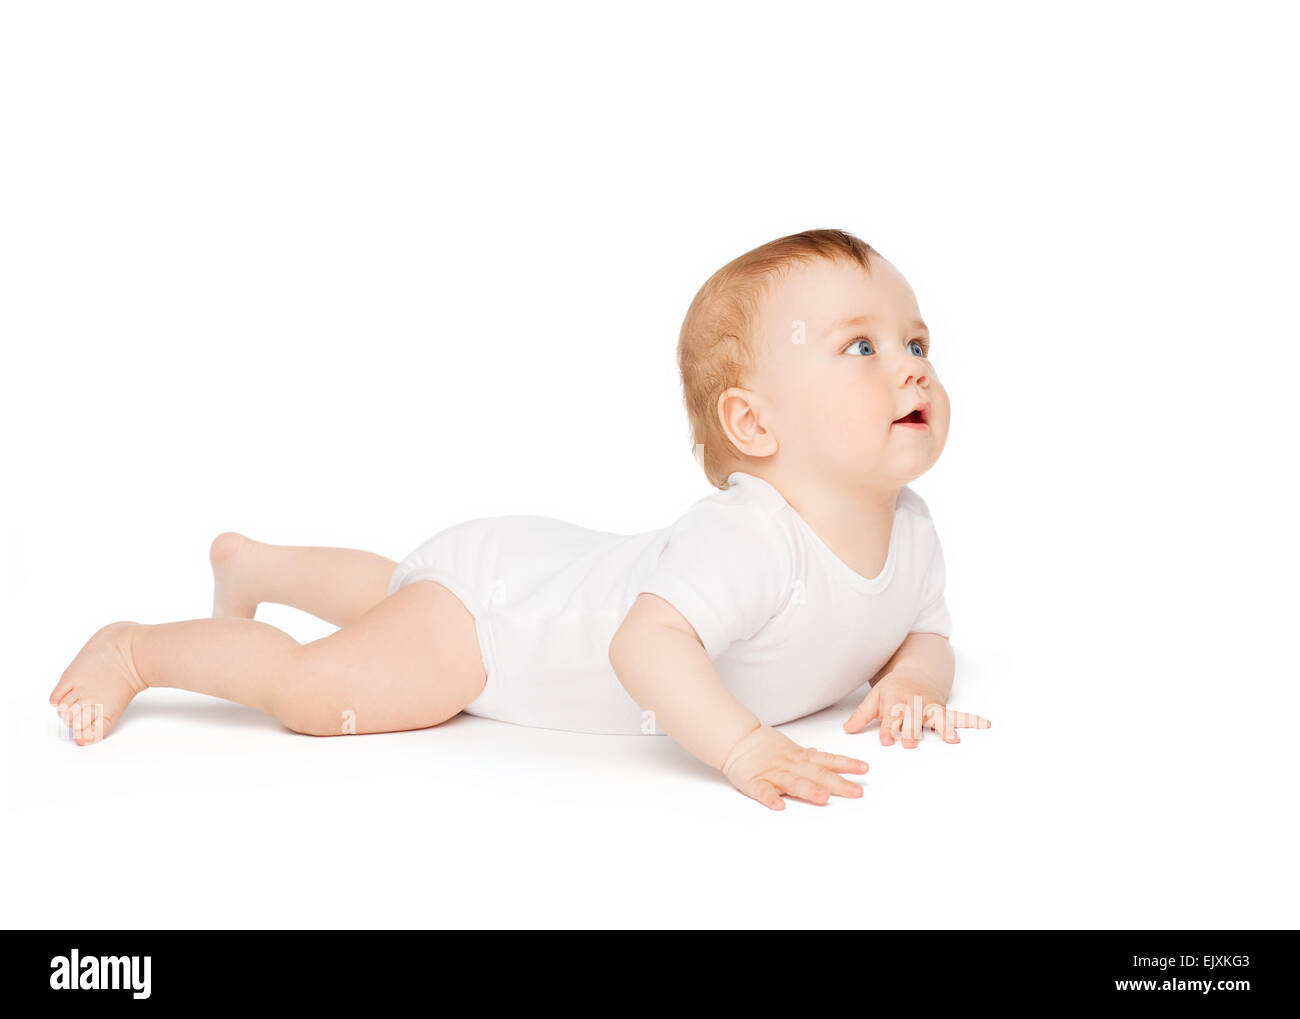 Smiling baby lying on floor and looking up Banque D'Images